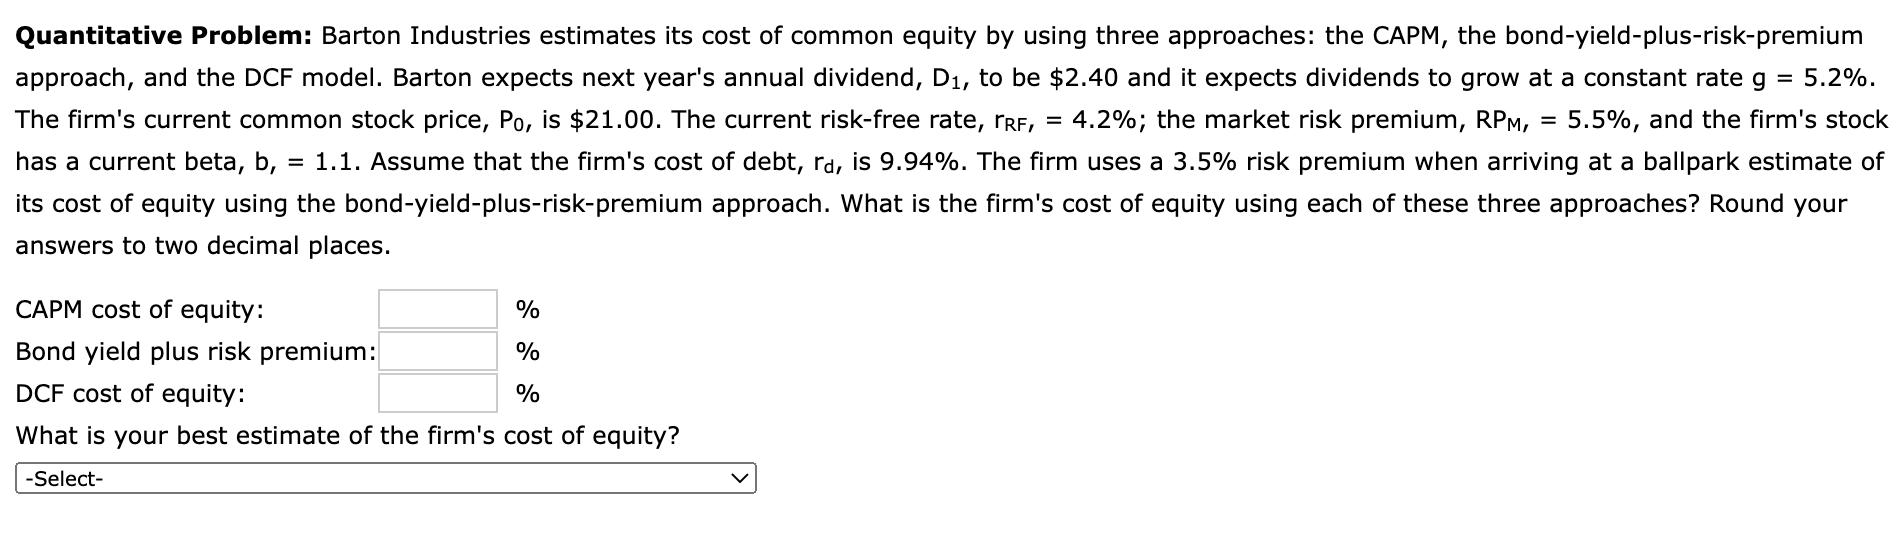 Quantitative Problem: Barton Industries estimates its cost of common equity by using three approaches: the CAPM, the bond-yie